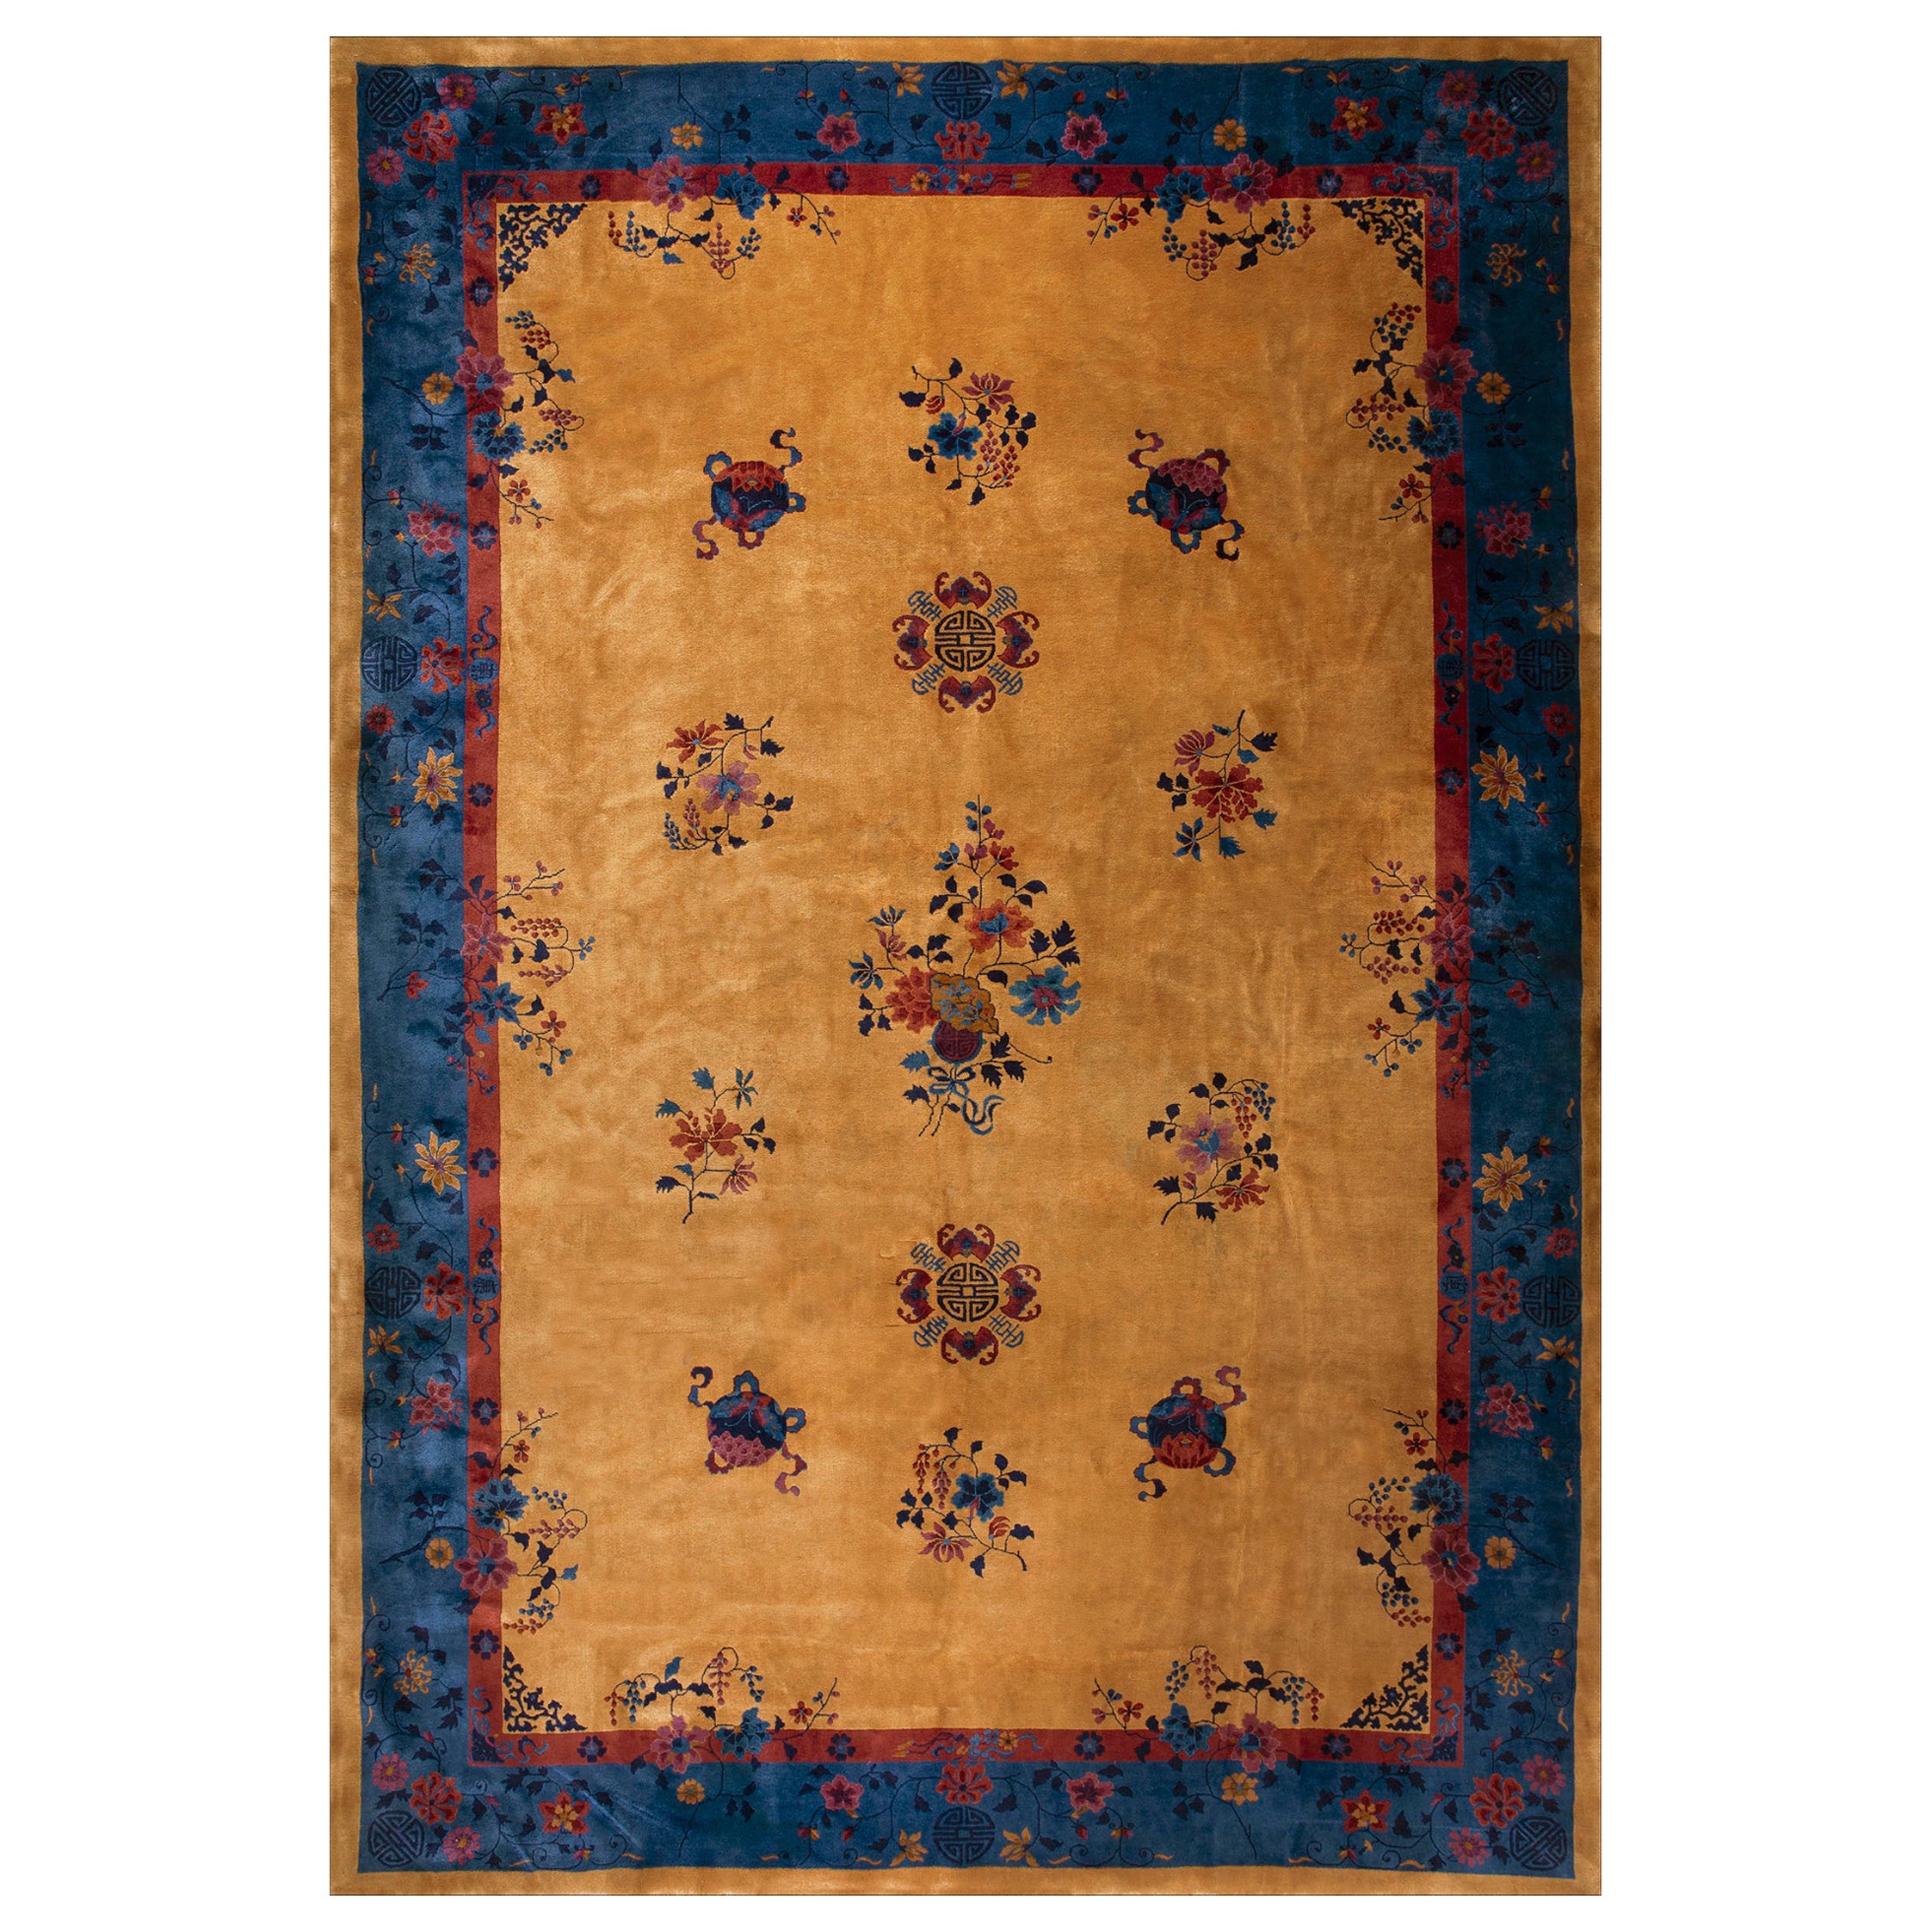 1920s Chinese Art Deco Carpet ( 10' x 14'6" - 305 x 442 ) For Sale